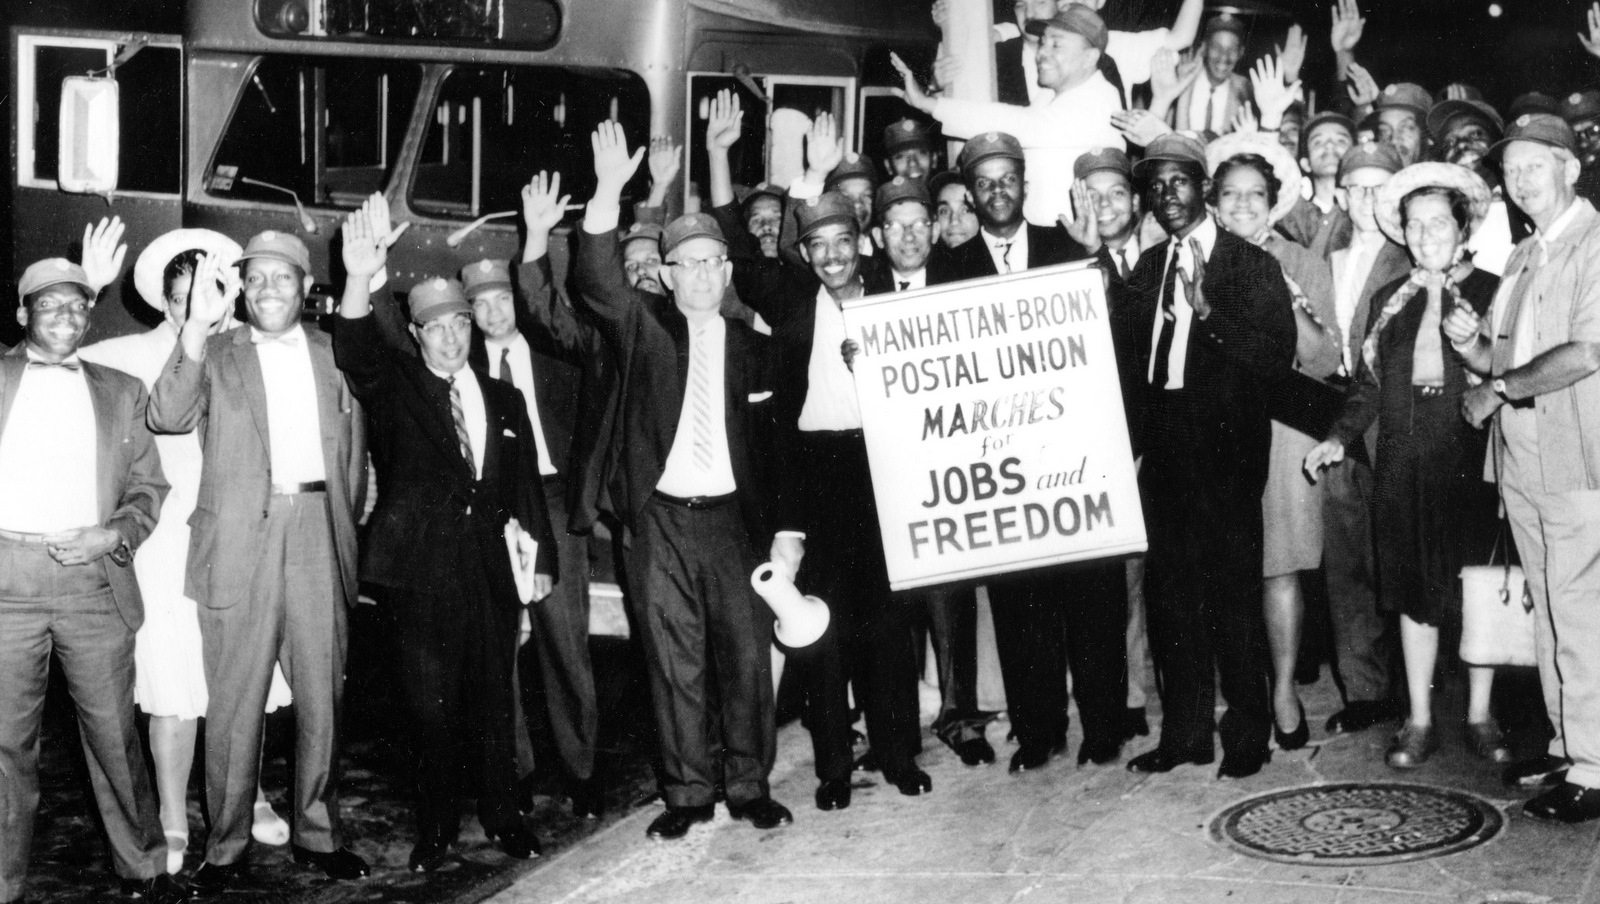 In 1963, African American New York postal workers boarded a bus for Washington to draw attention about the economic issues facing Black workers.